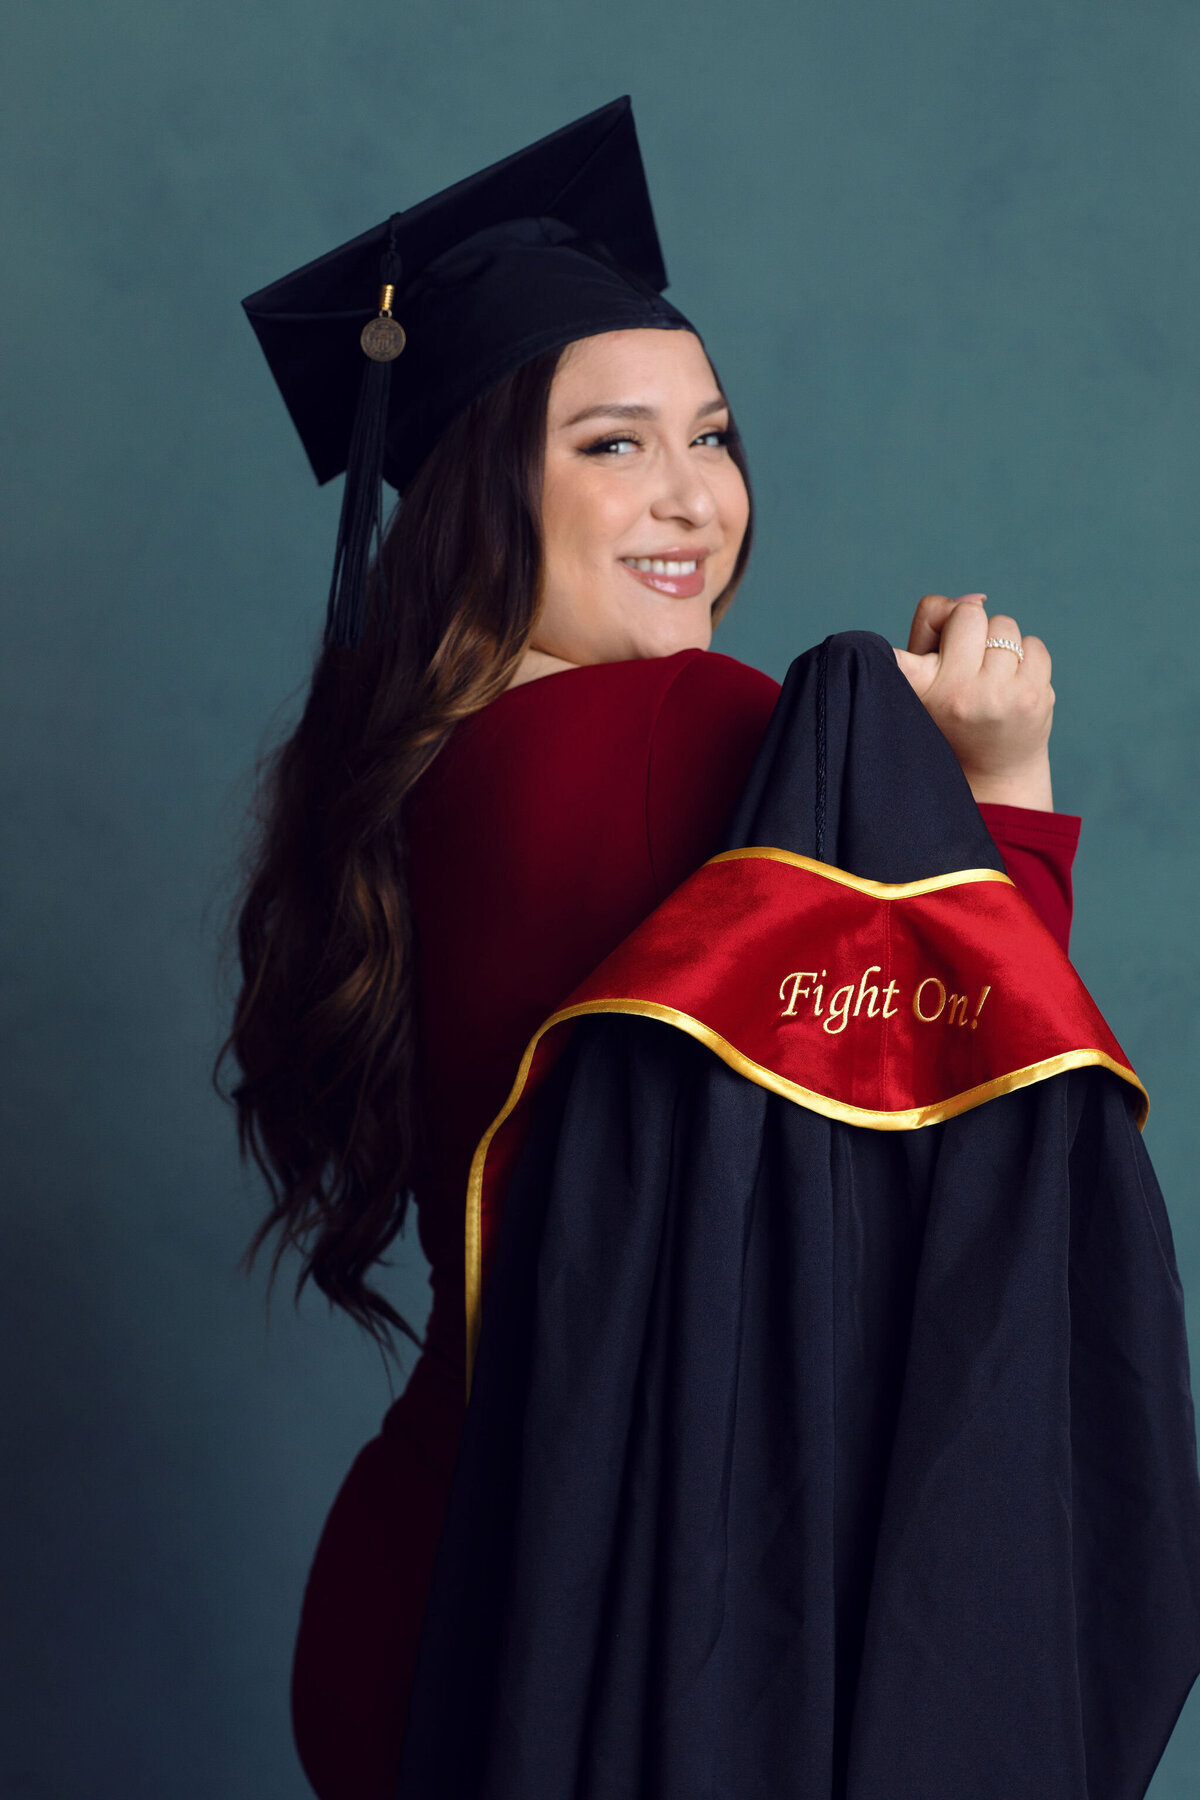 Graduation Portrait Of Young Woman Showing Her Black Toga Los Angeles